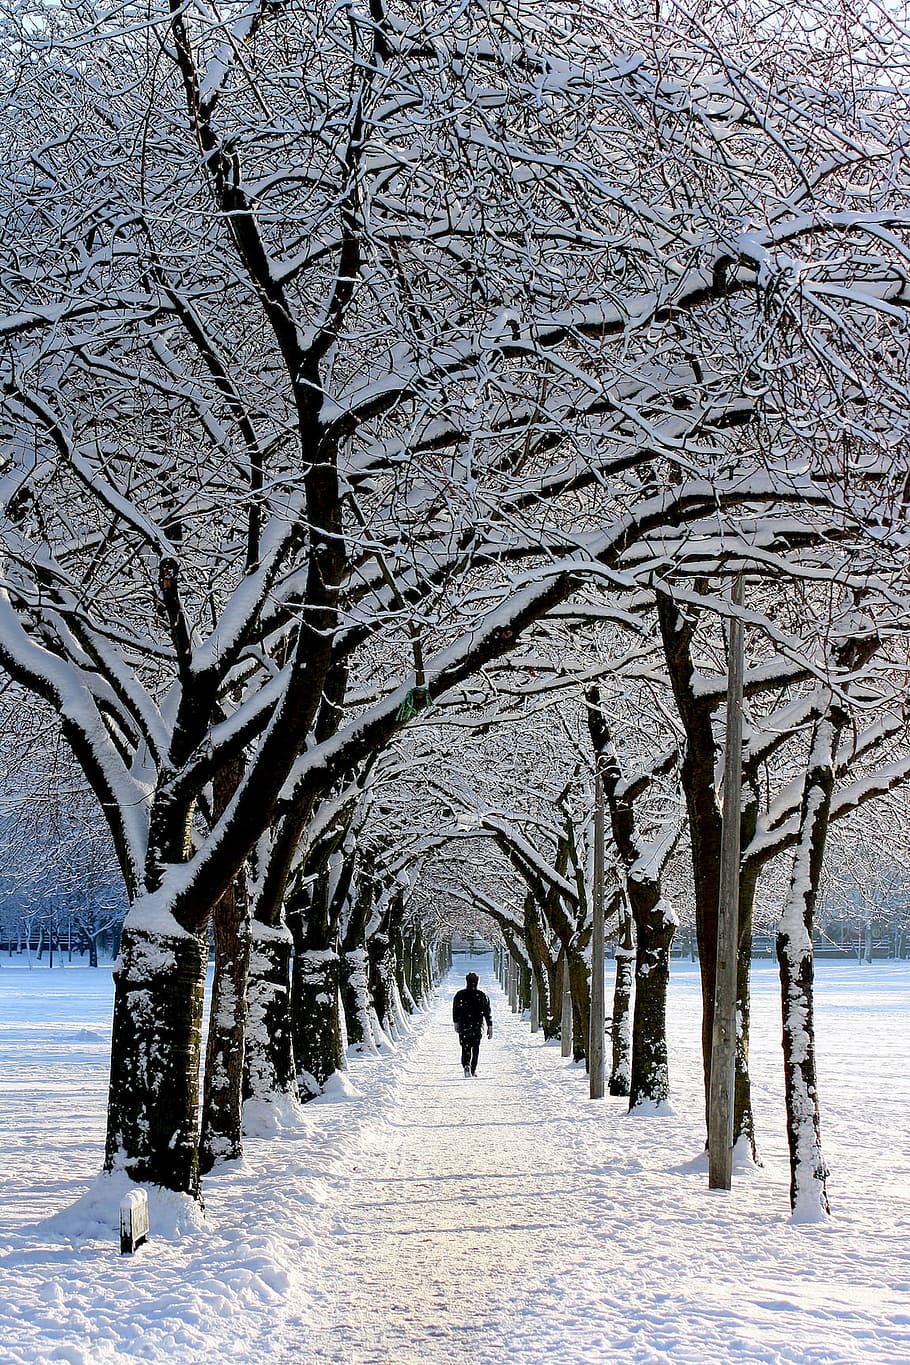 person, walking, snow-covered, trees, nature, snow, winter, people, man, guy